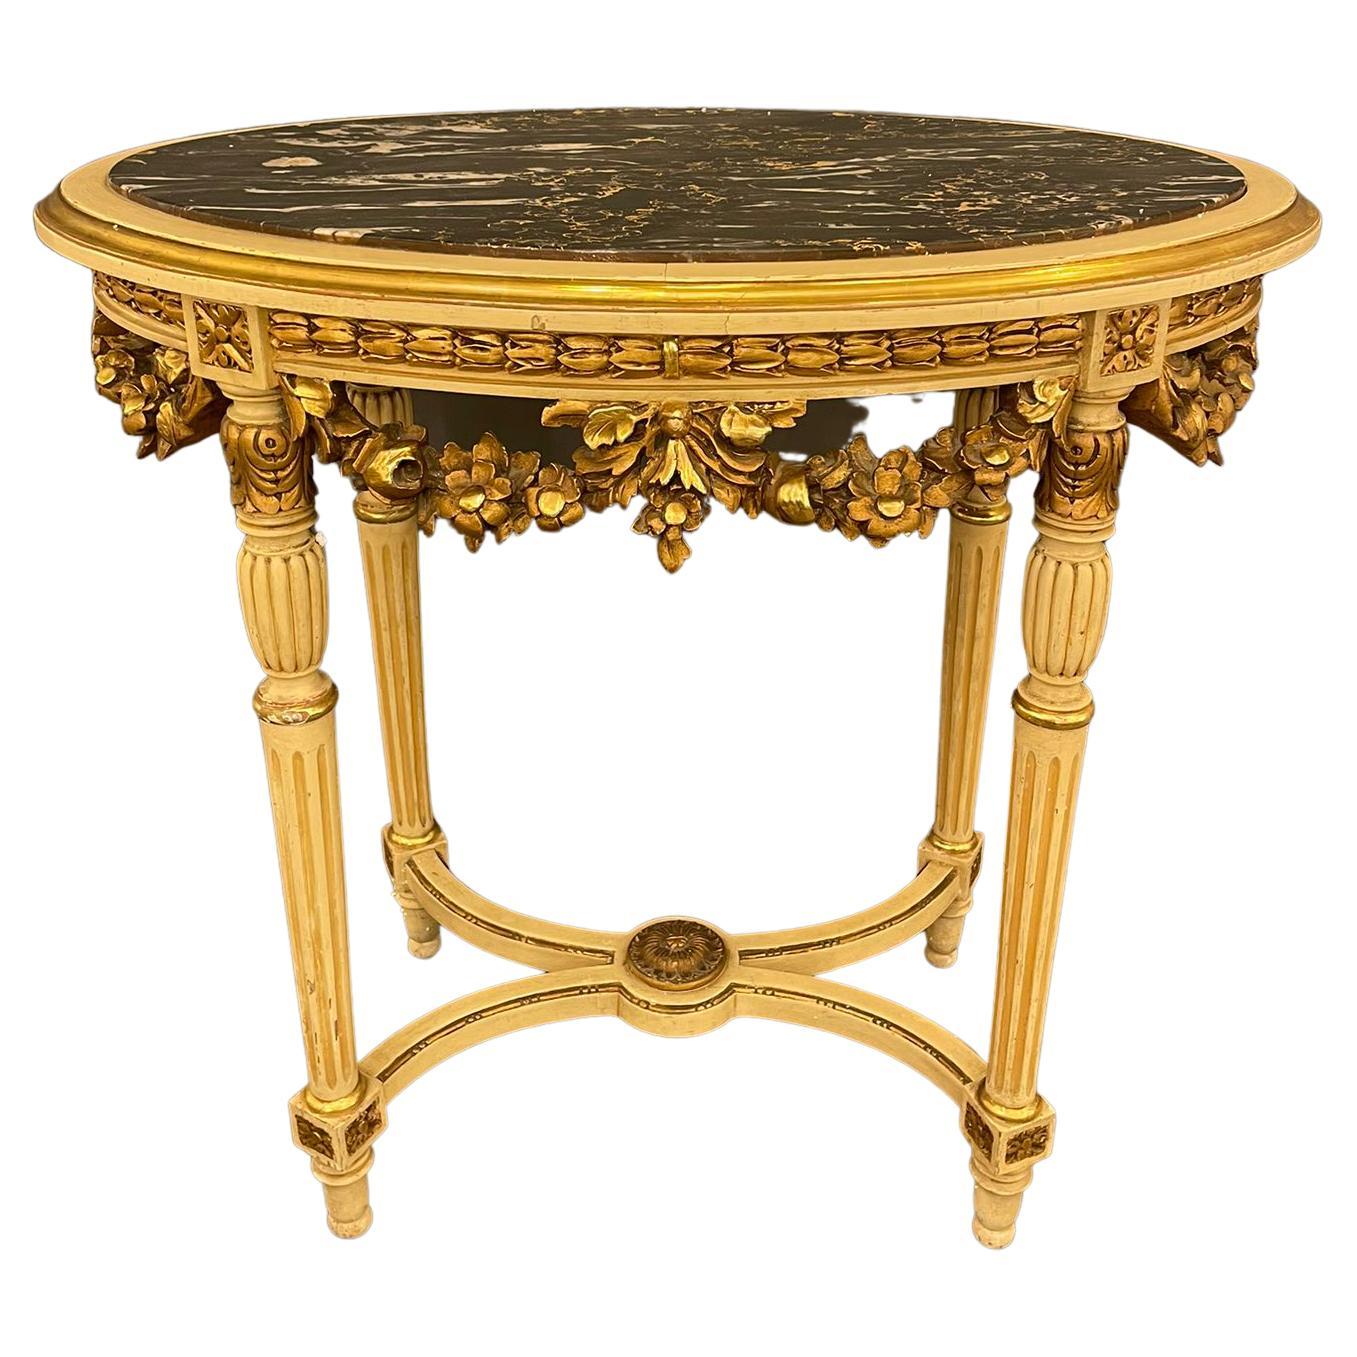 Table with Louis Vuitton Logo, 1890s